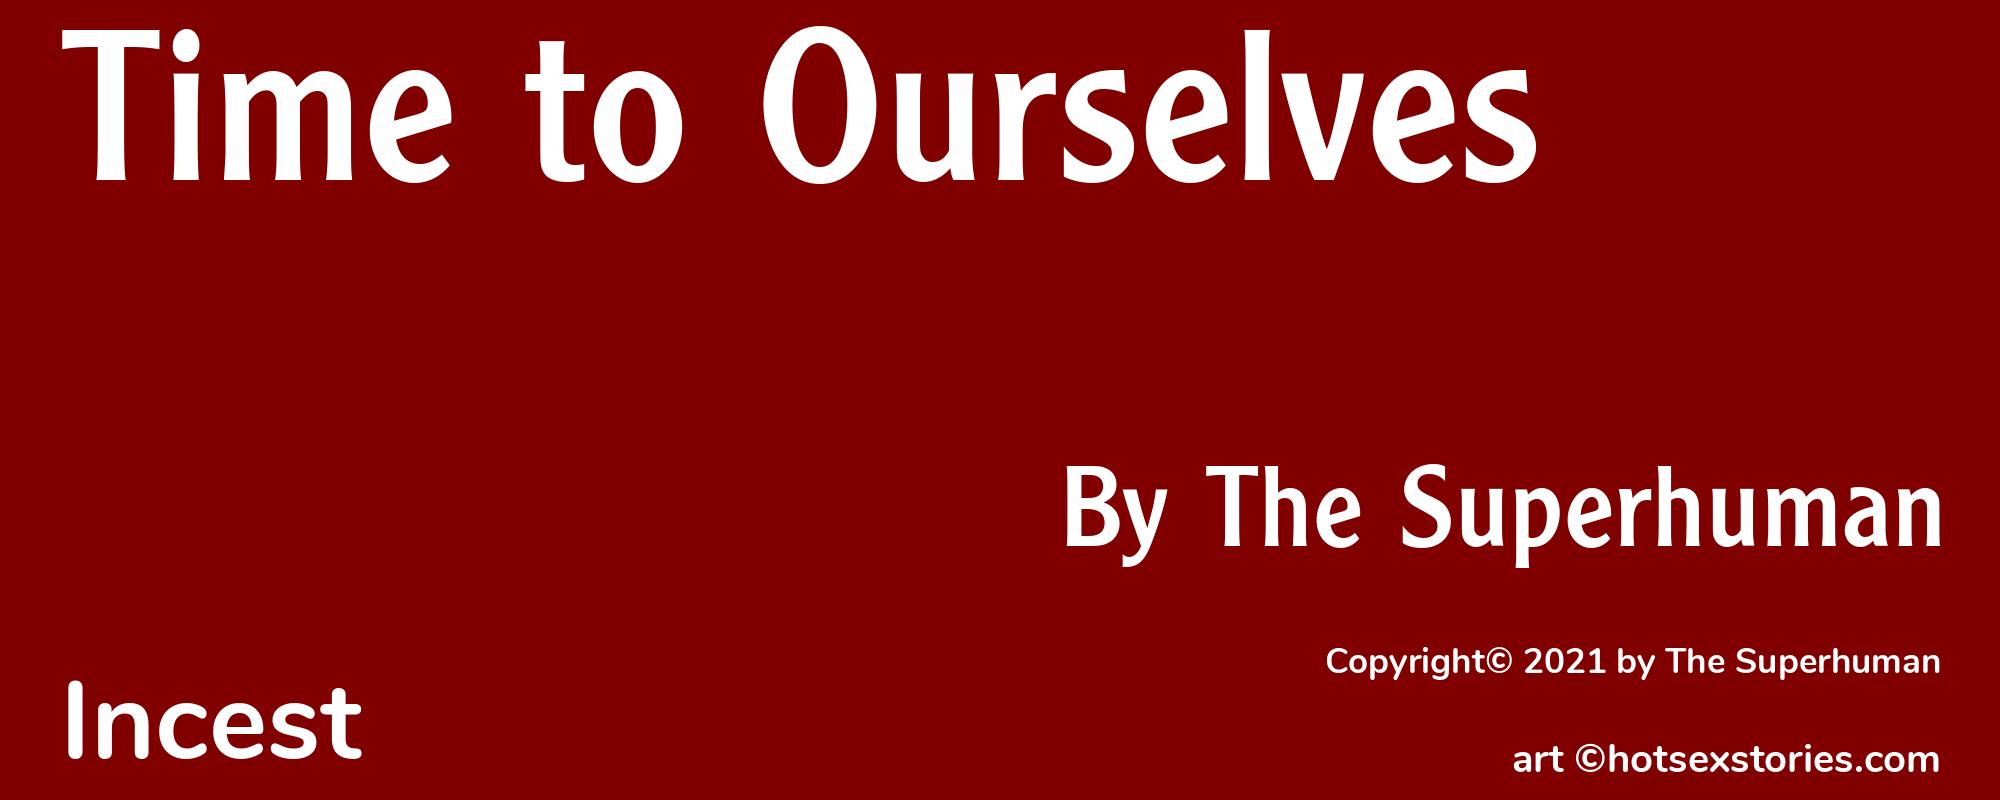 Time to Ourselves - Cover